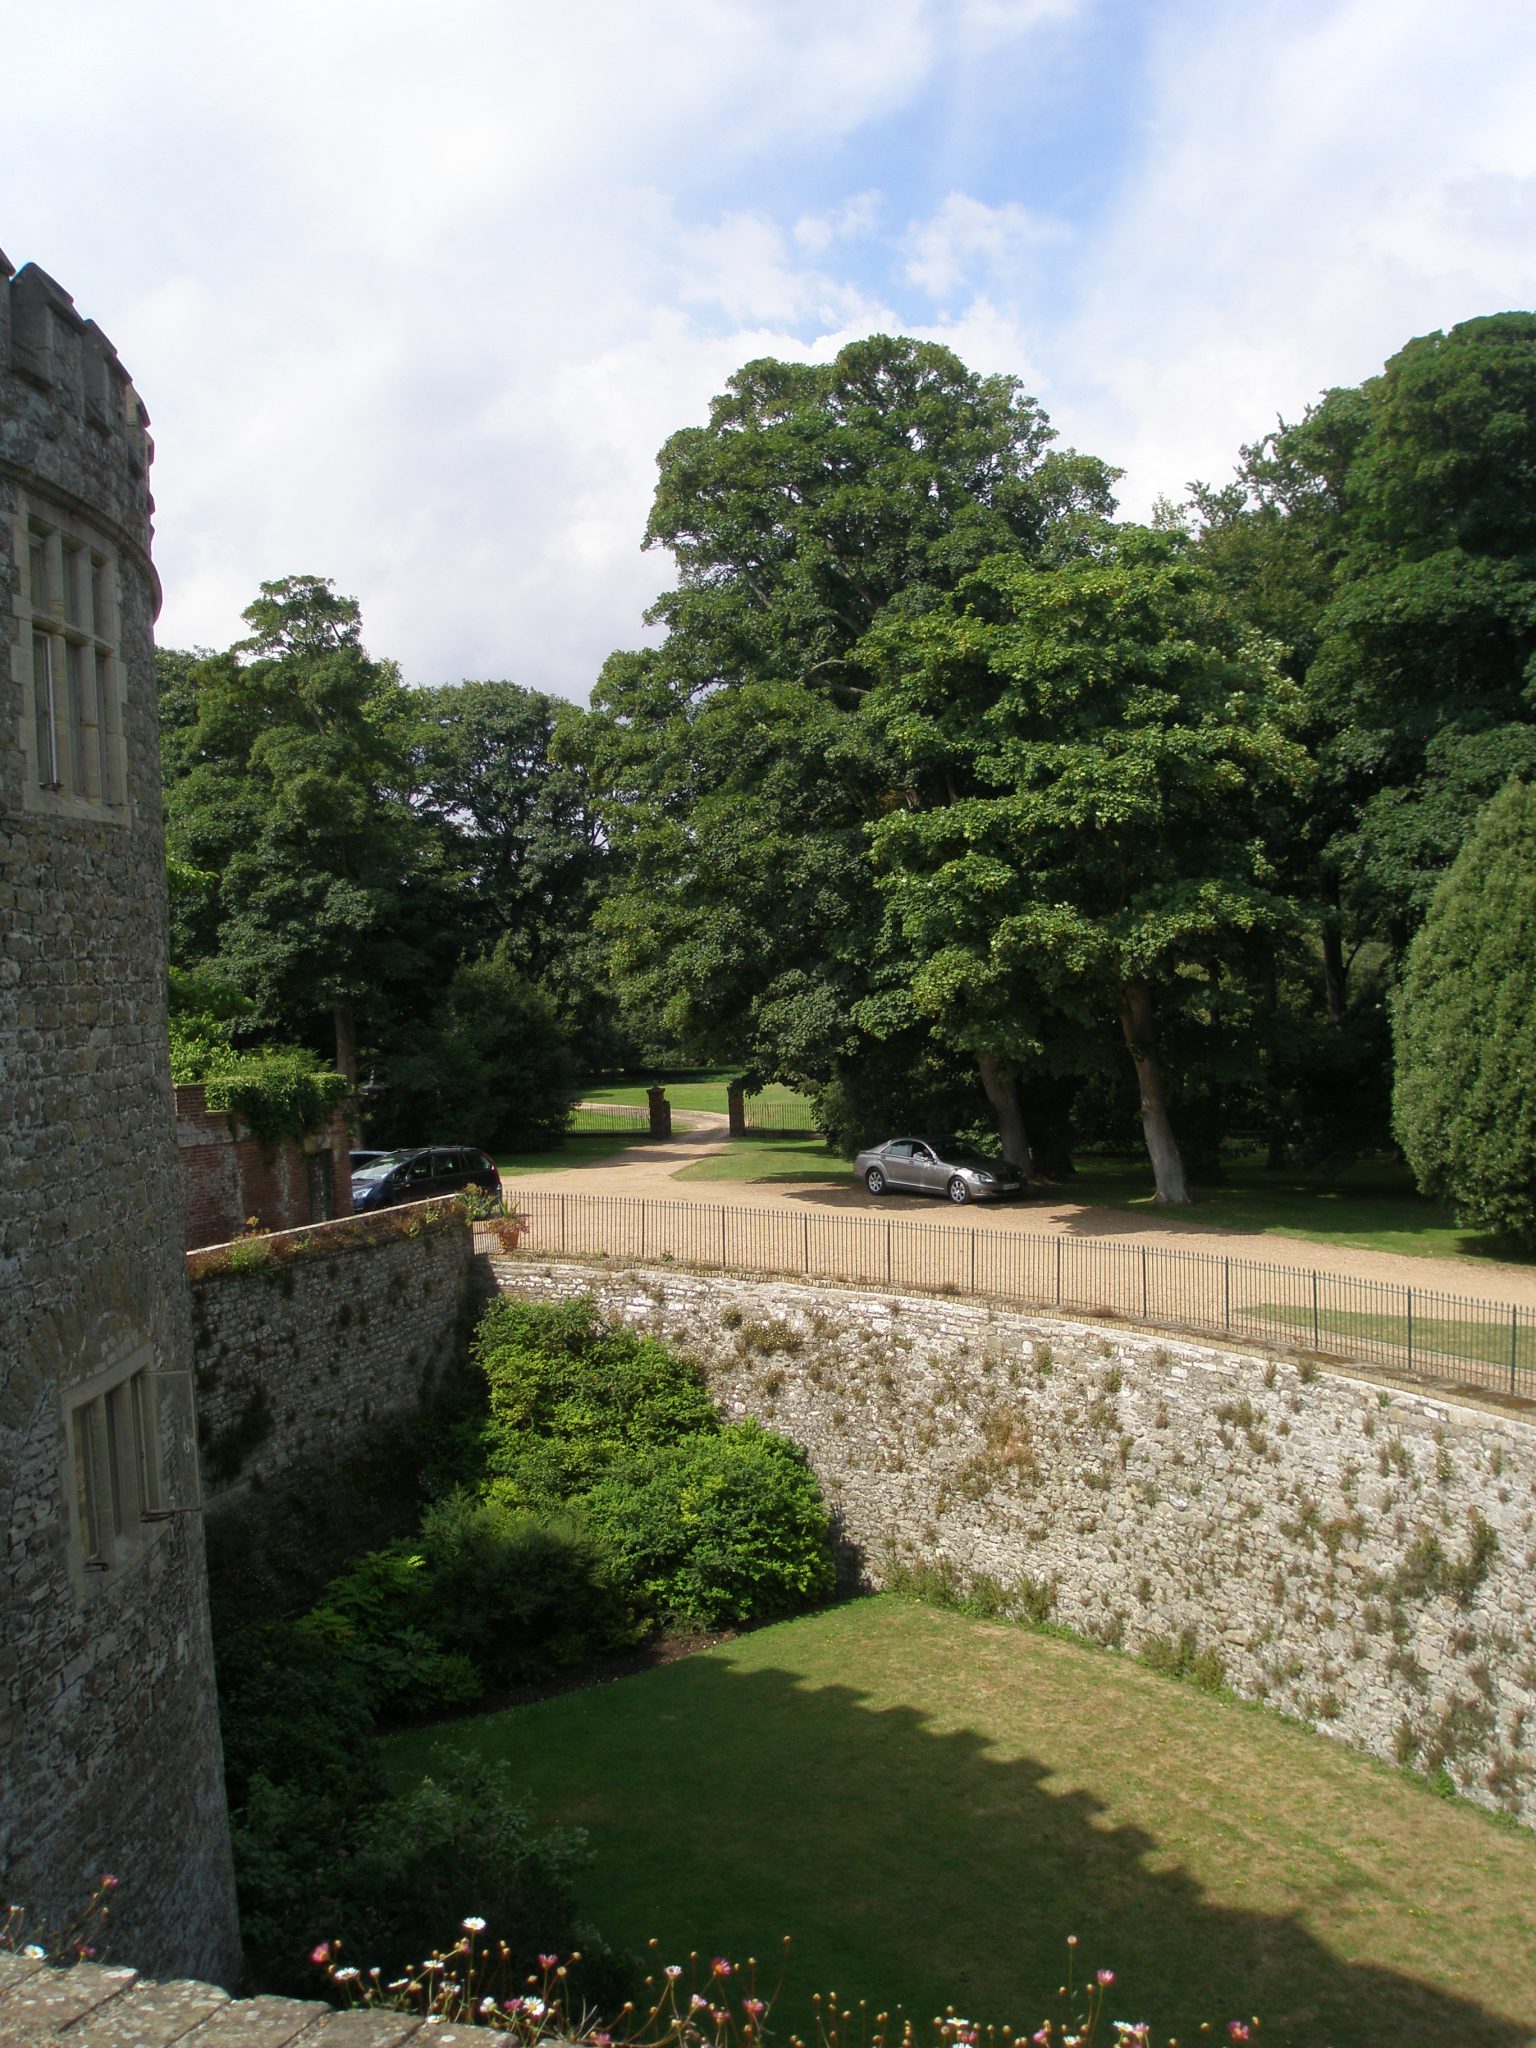 As we stepped out onto the Ramparts, I looked across the moat, and saw Steve's well-shaded silver car.